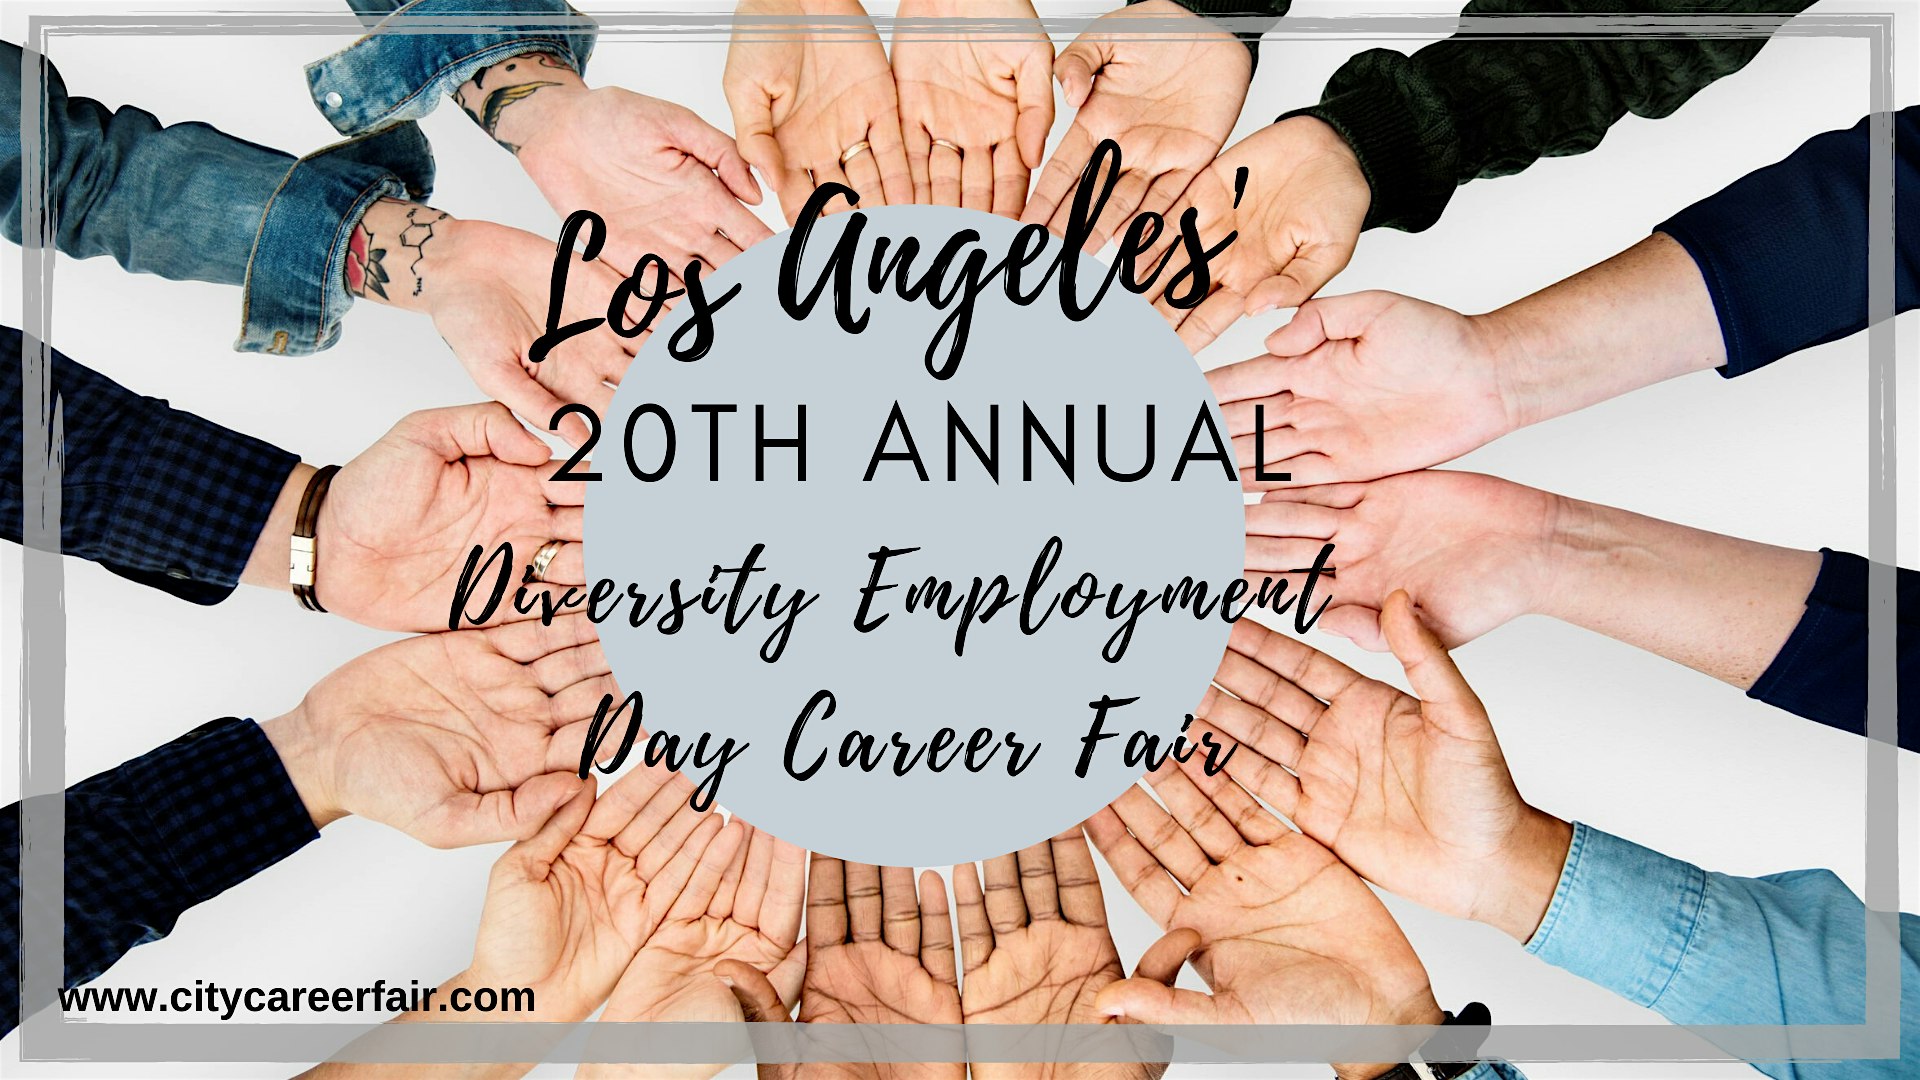 LOS ANGELES' 20th ANNUAL DIVERSITY EMPLOYMENT DAY CAREER FAIR September 23, 2020